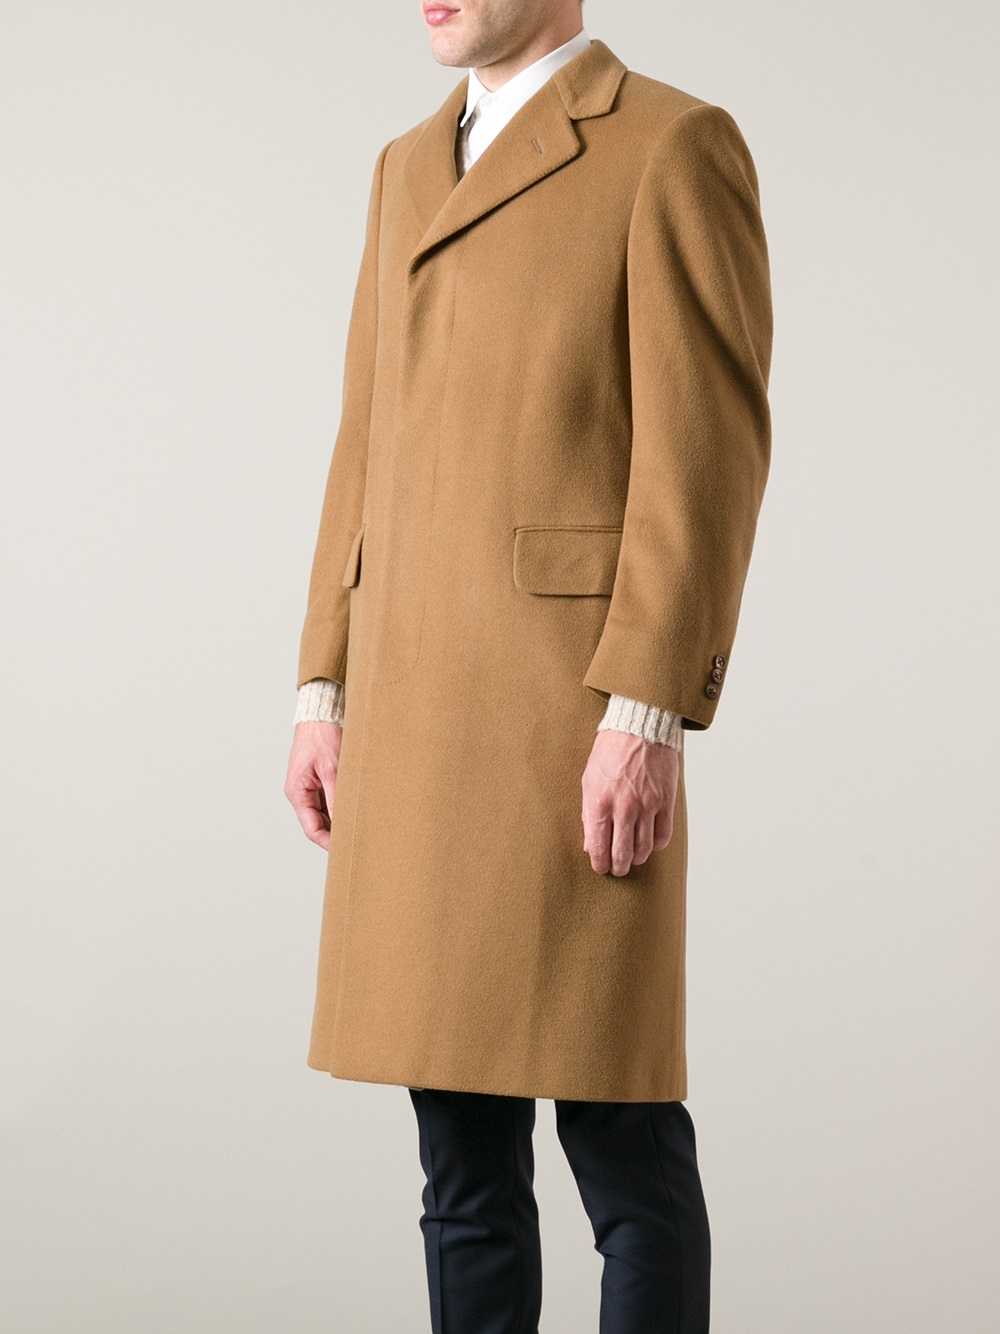 Lyst - Aquascutum Cashmere and Wool Coat in Brown for Men